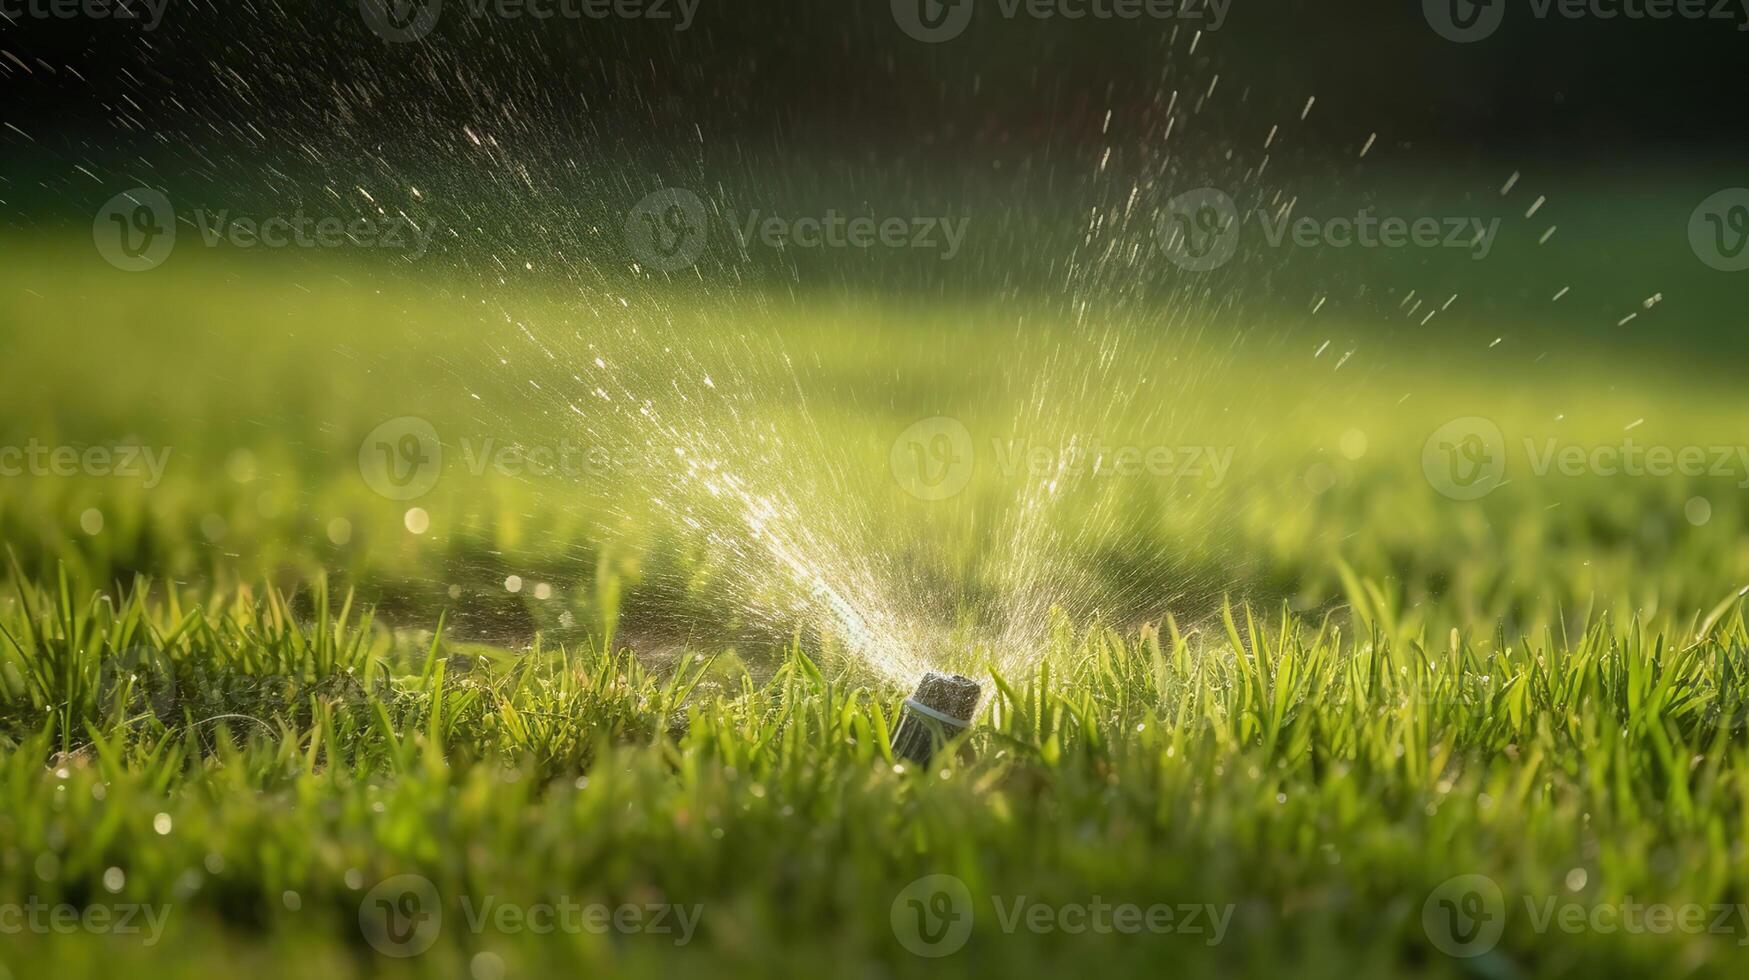 Water spraying from hose on green grass outdoors, photo